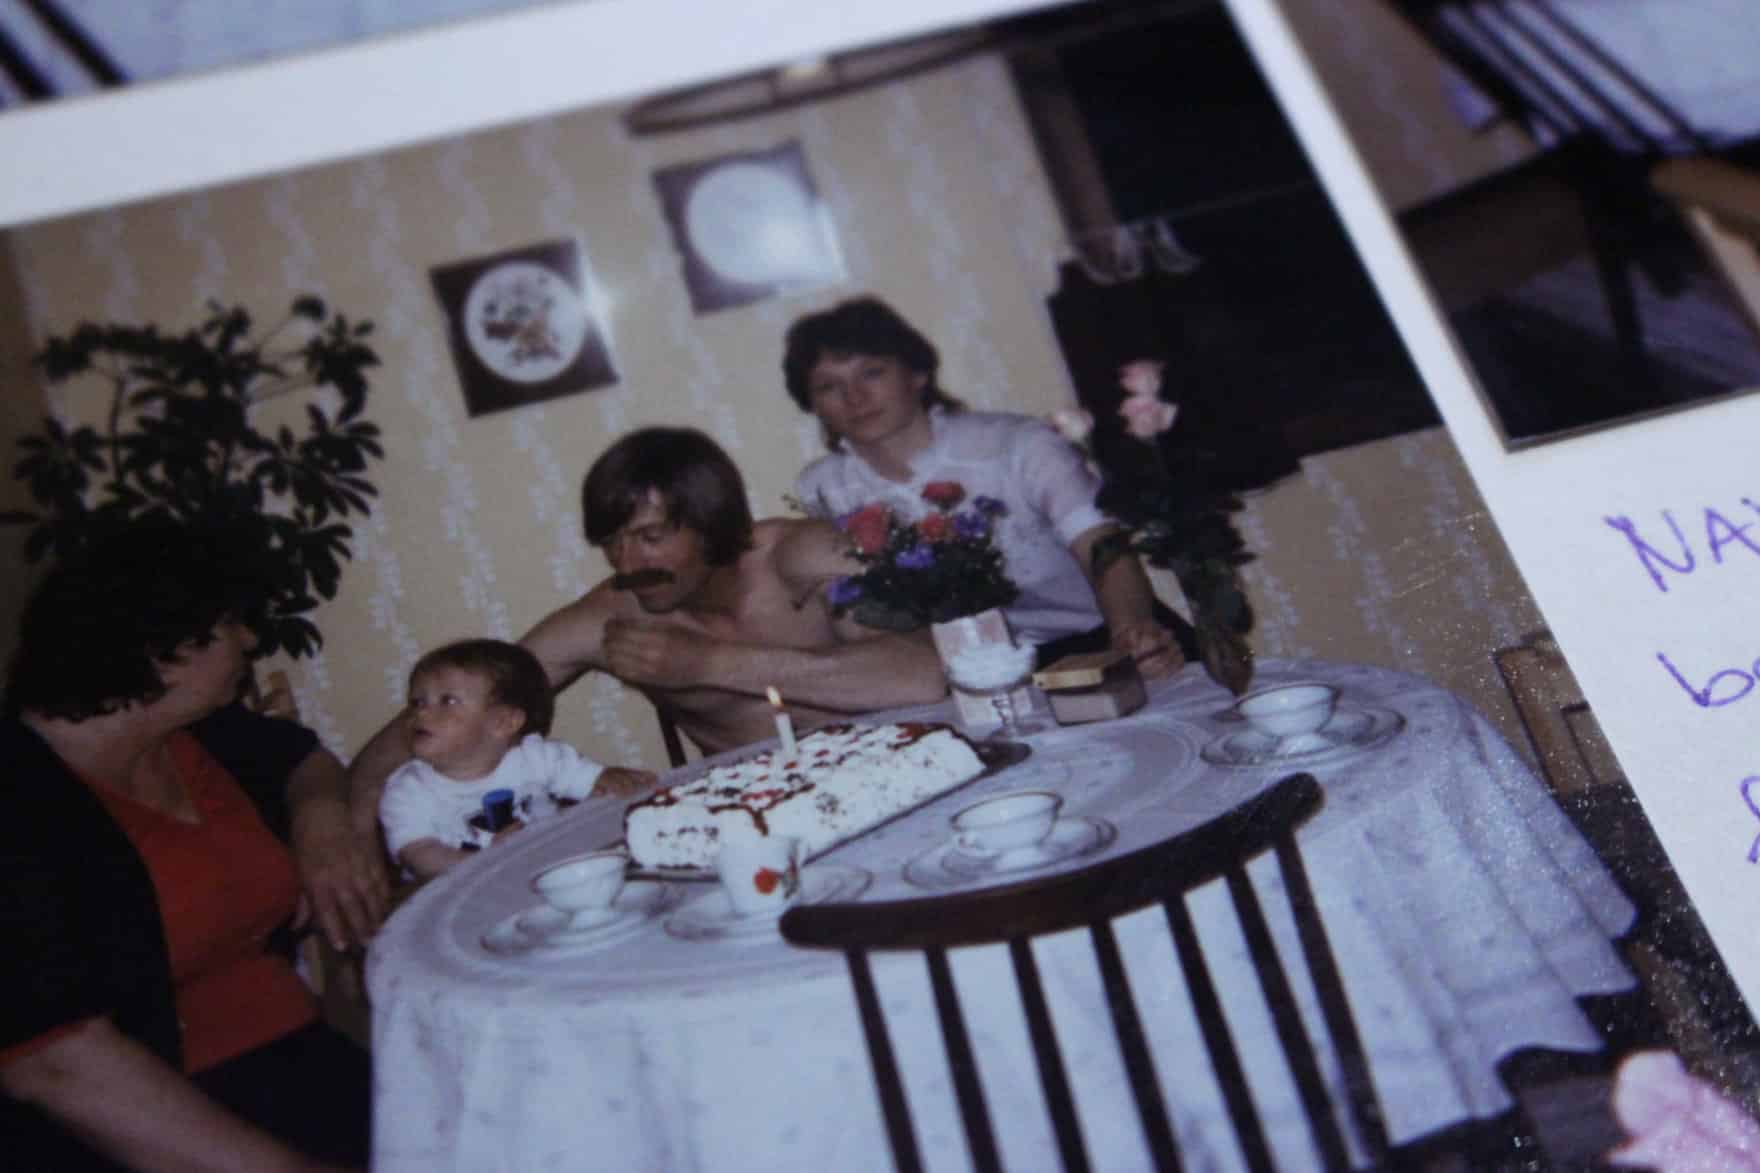 Carlos celebrating his first birthday, with his grandmother, father and aunt.